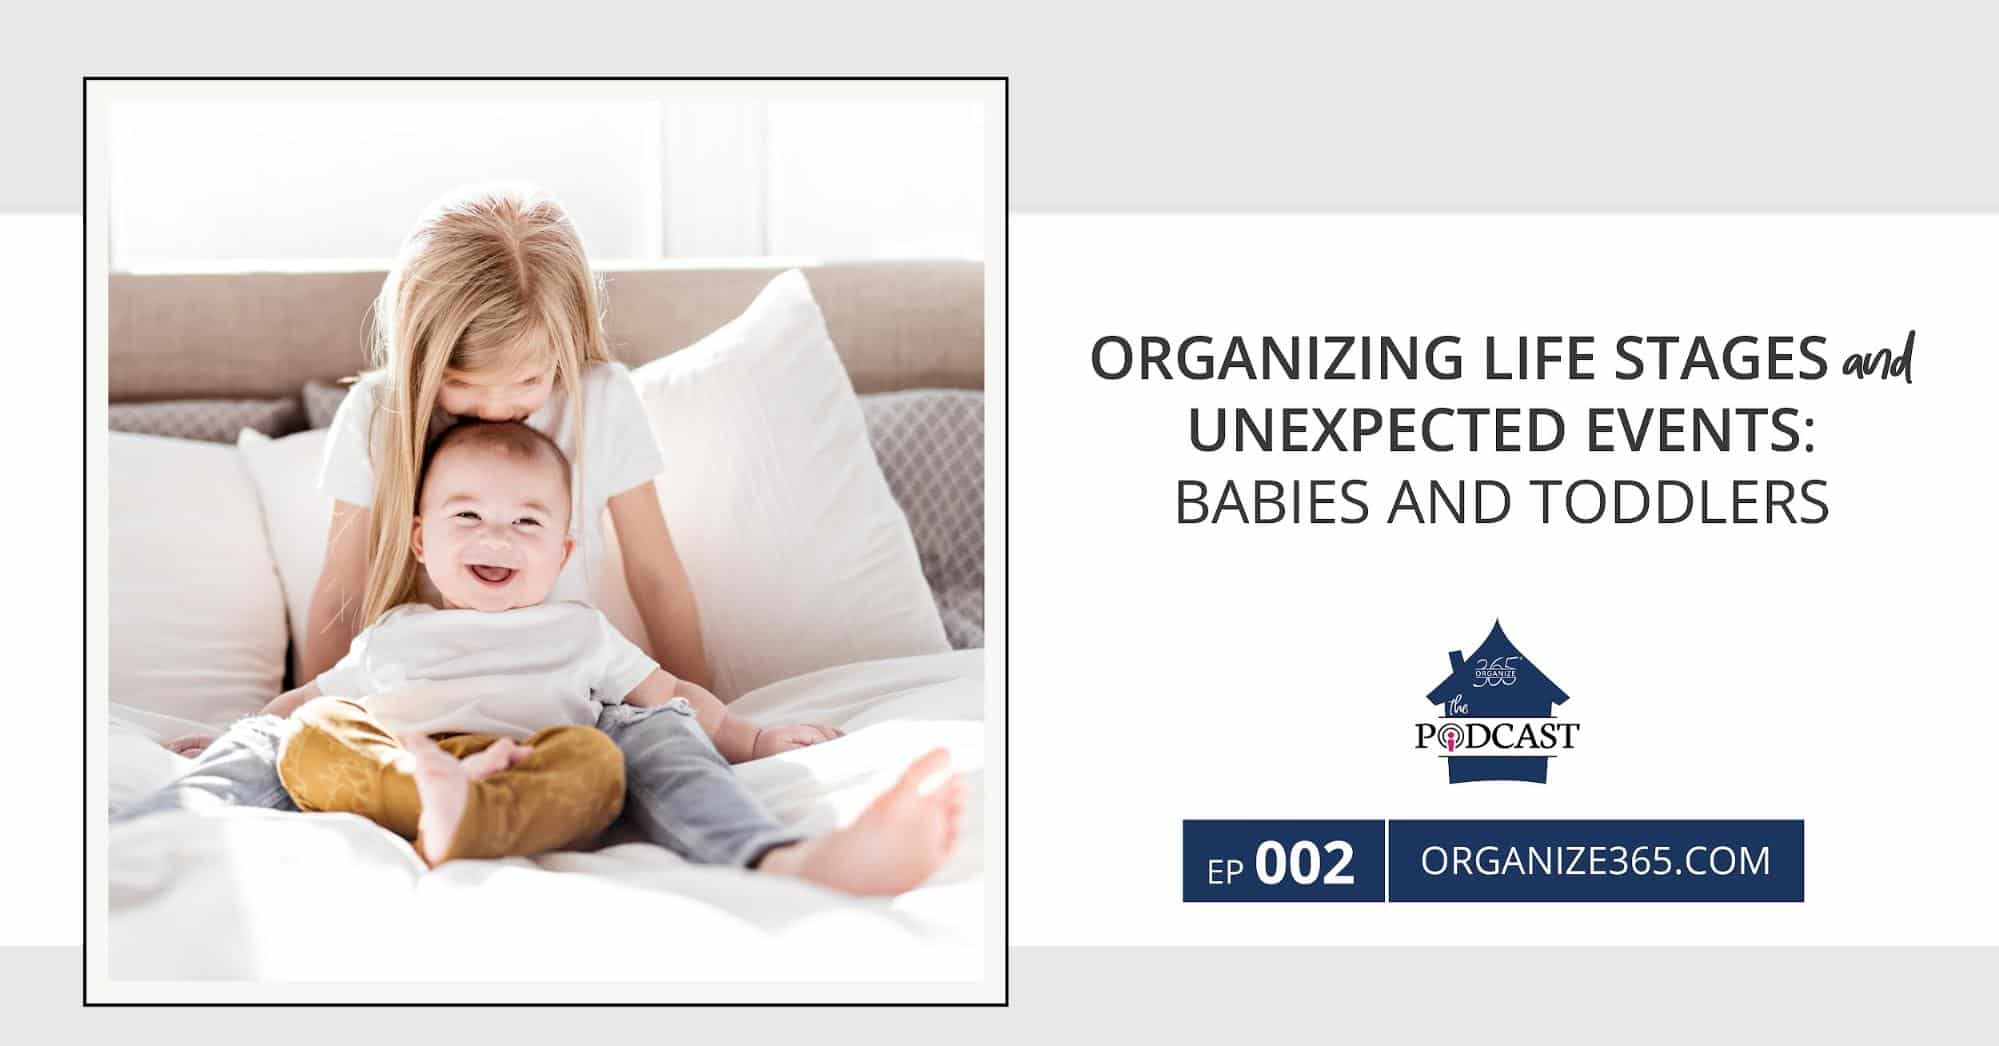 Organizing-Life-Stages-&-Unexpected-Events-Babies-and-Toddlers-photo-1